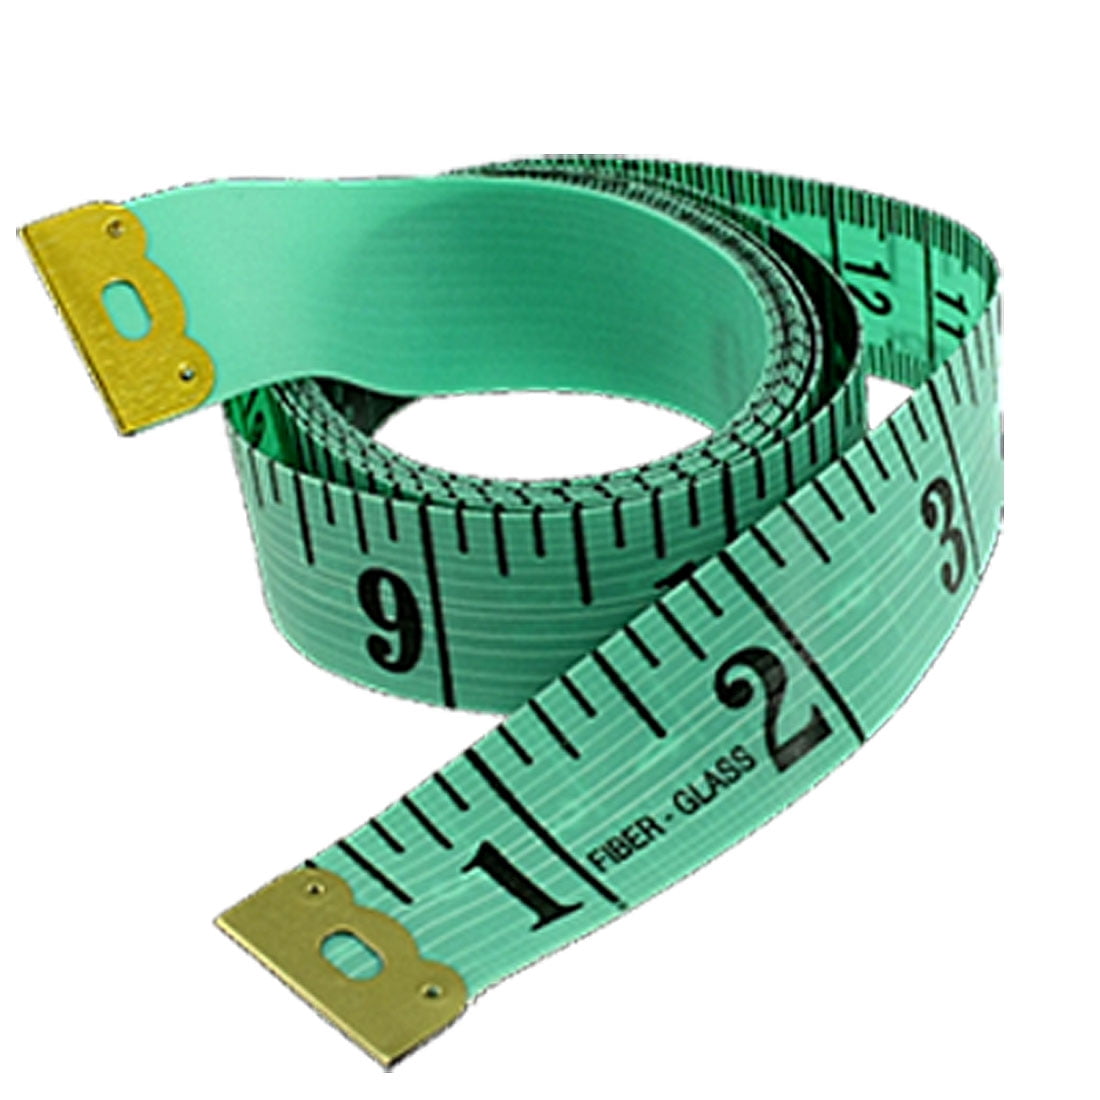 Custom Fabric Clothing Tape Measure 62 Inch X 0.75 Inch Size